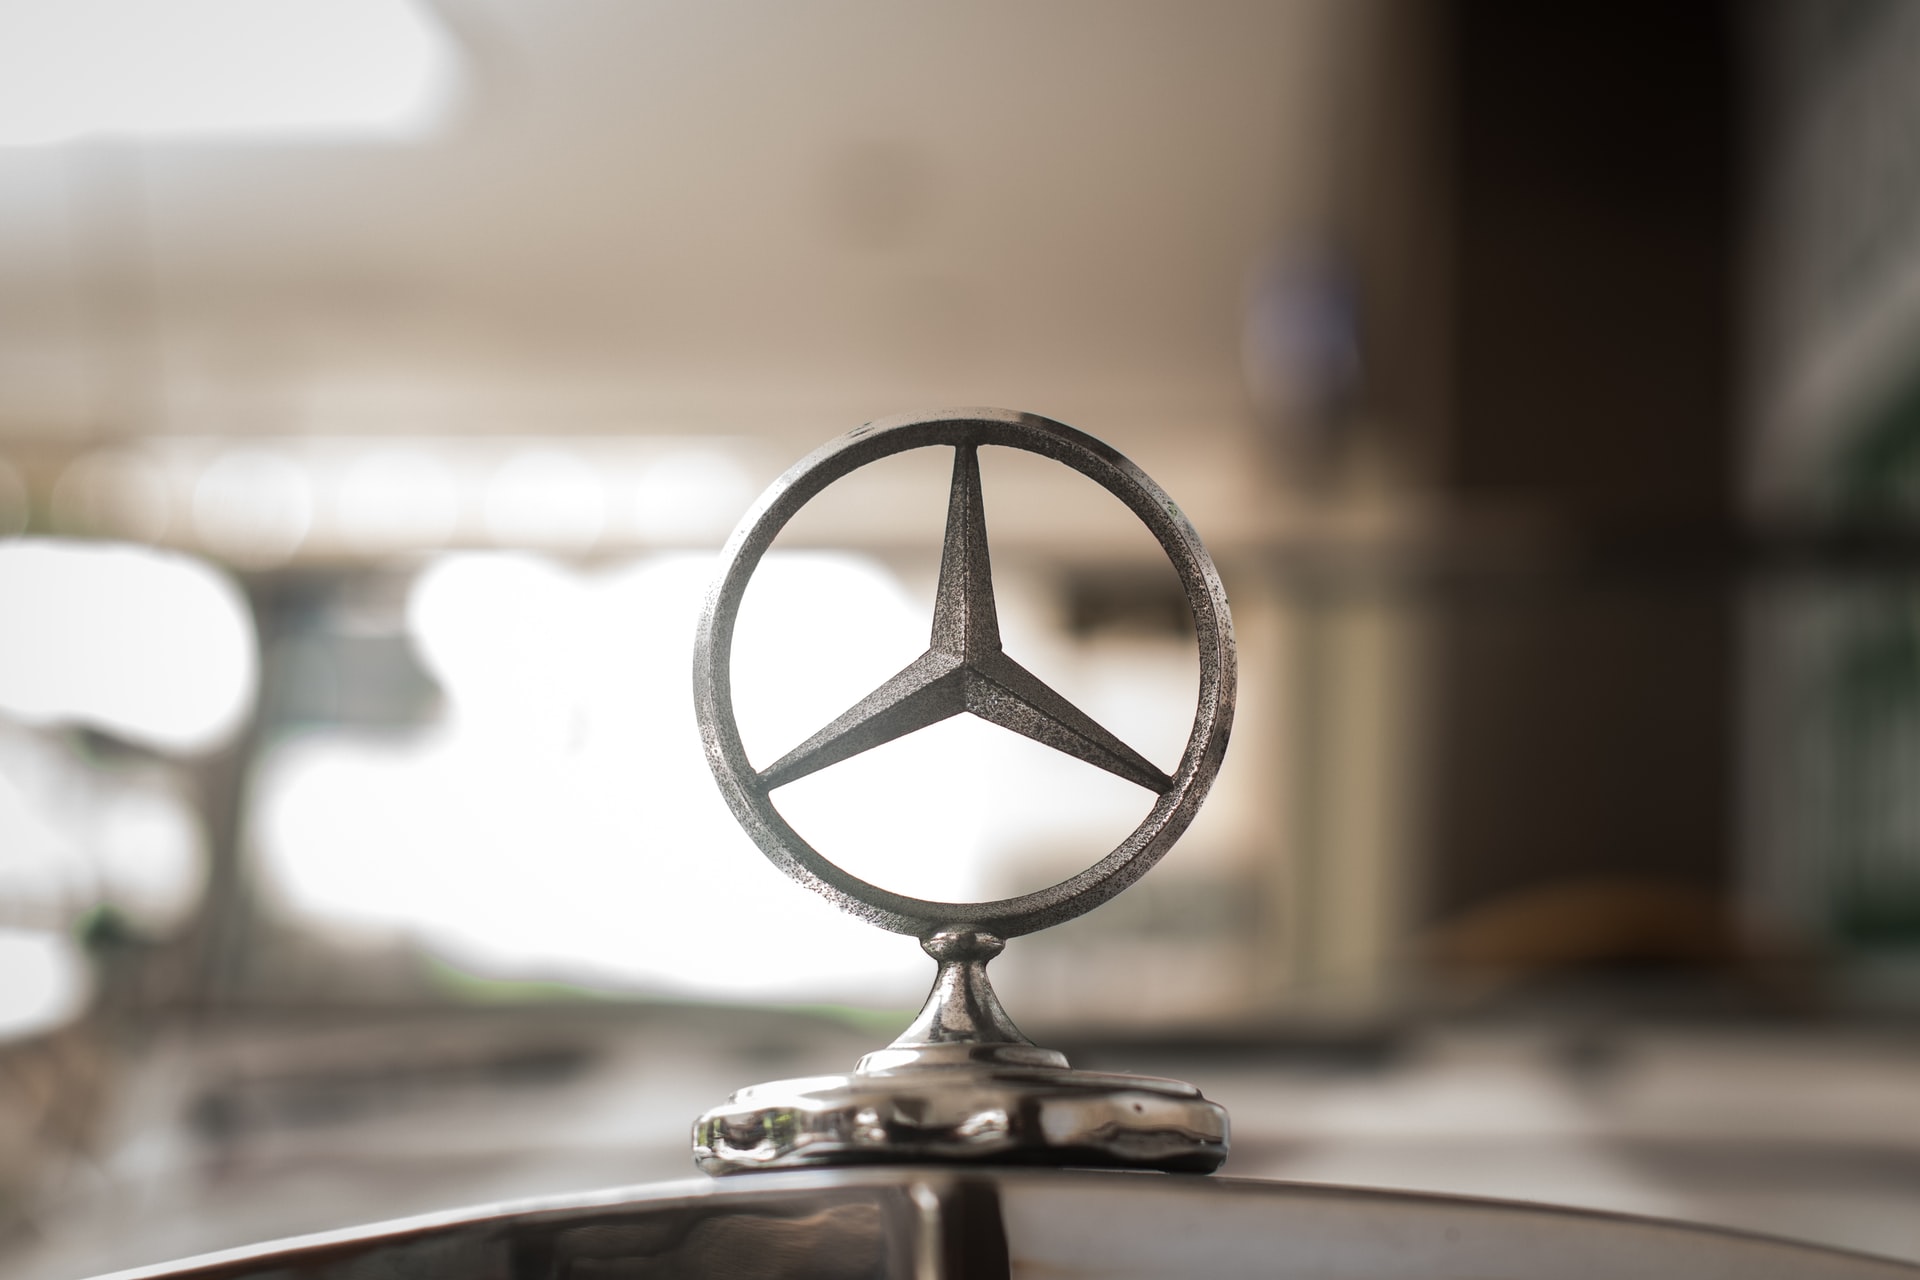 Mercedes-Benz Source Code Exposed Due To Mistakenly Published Password